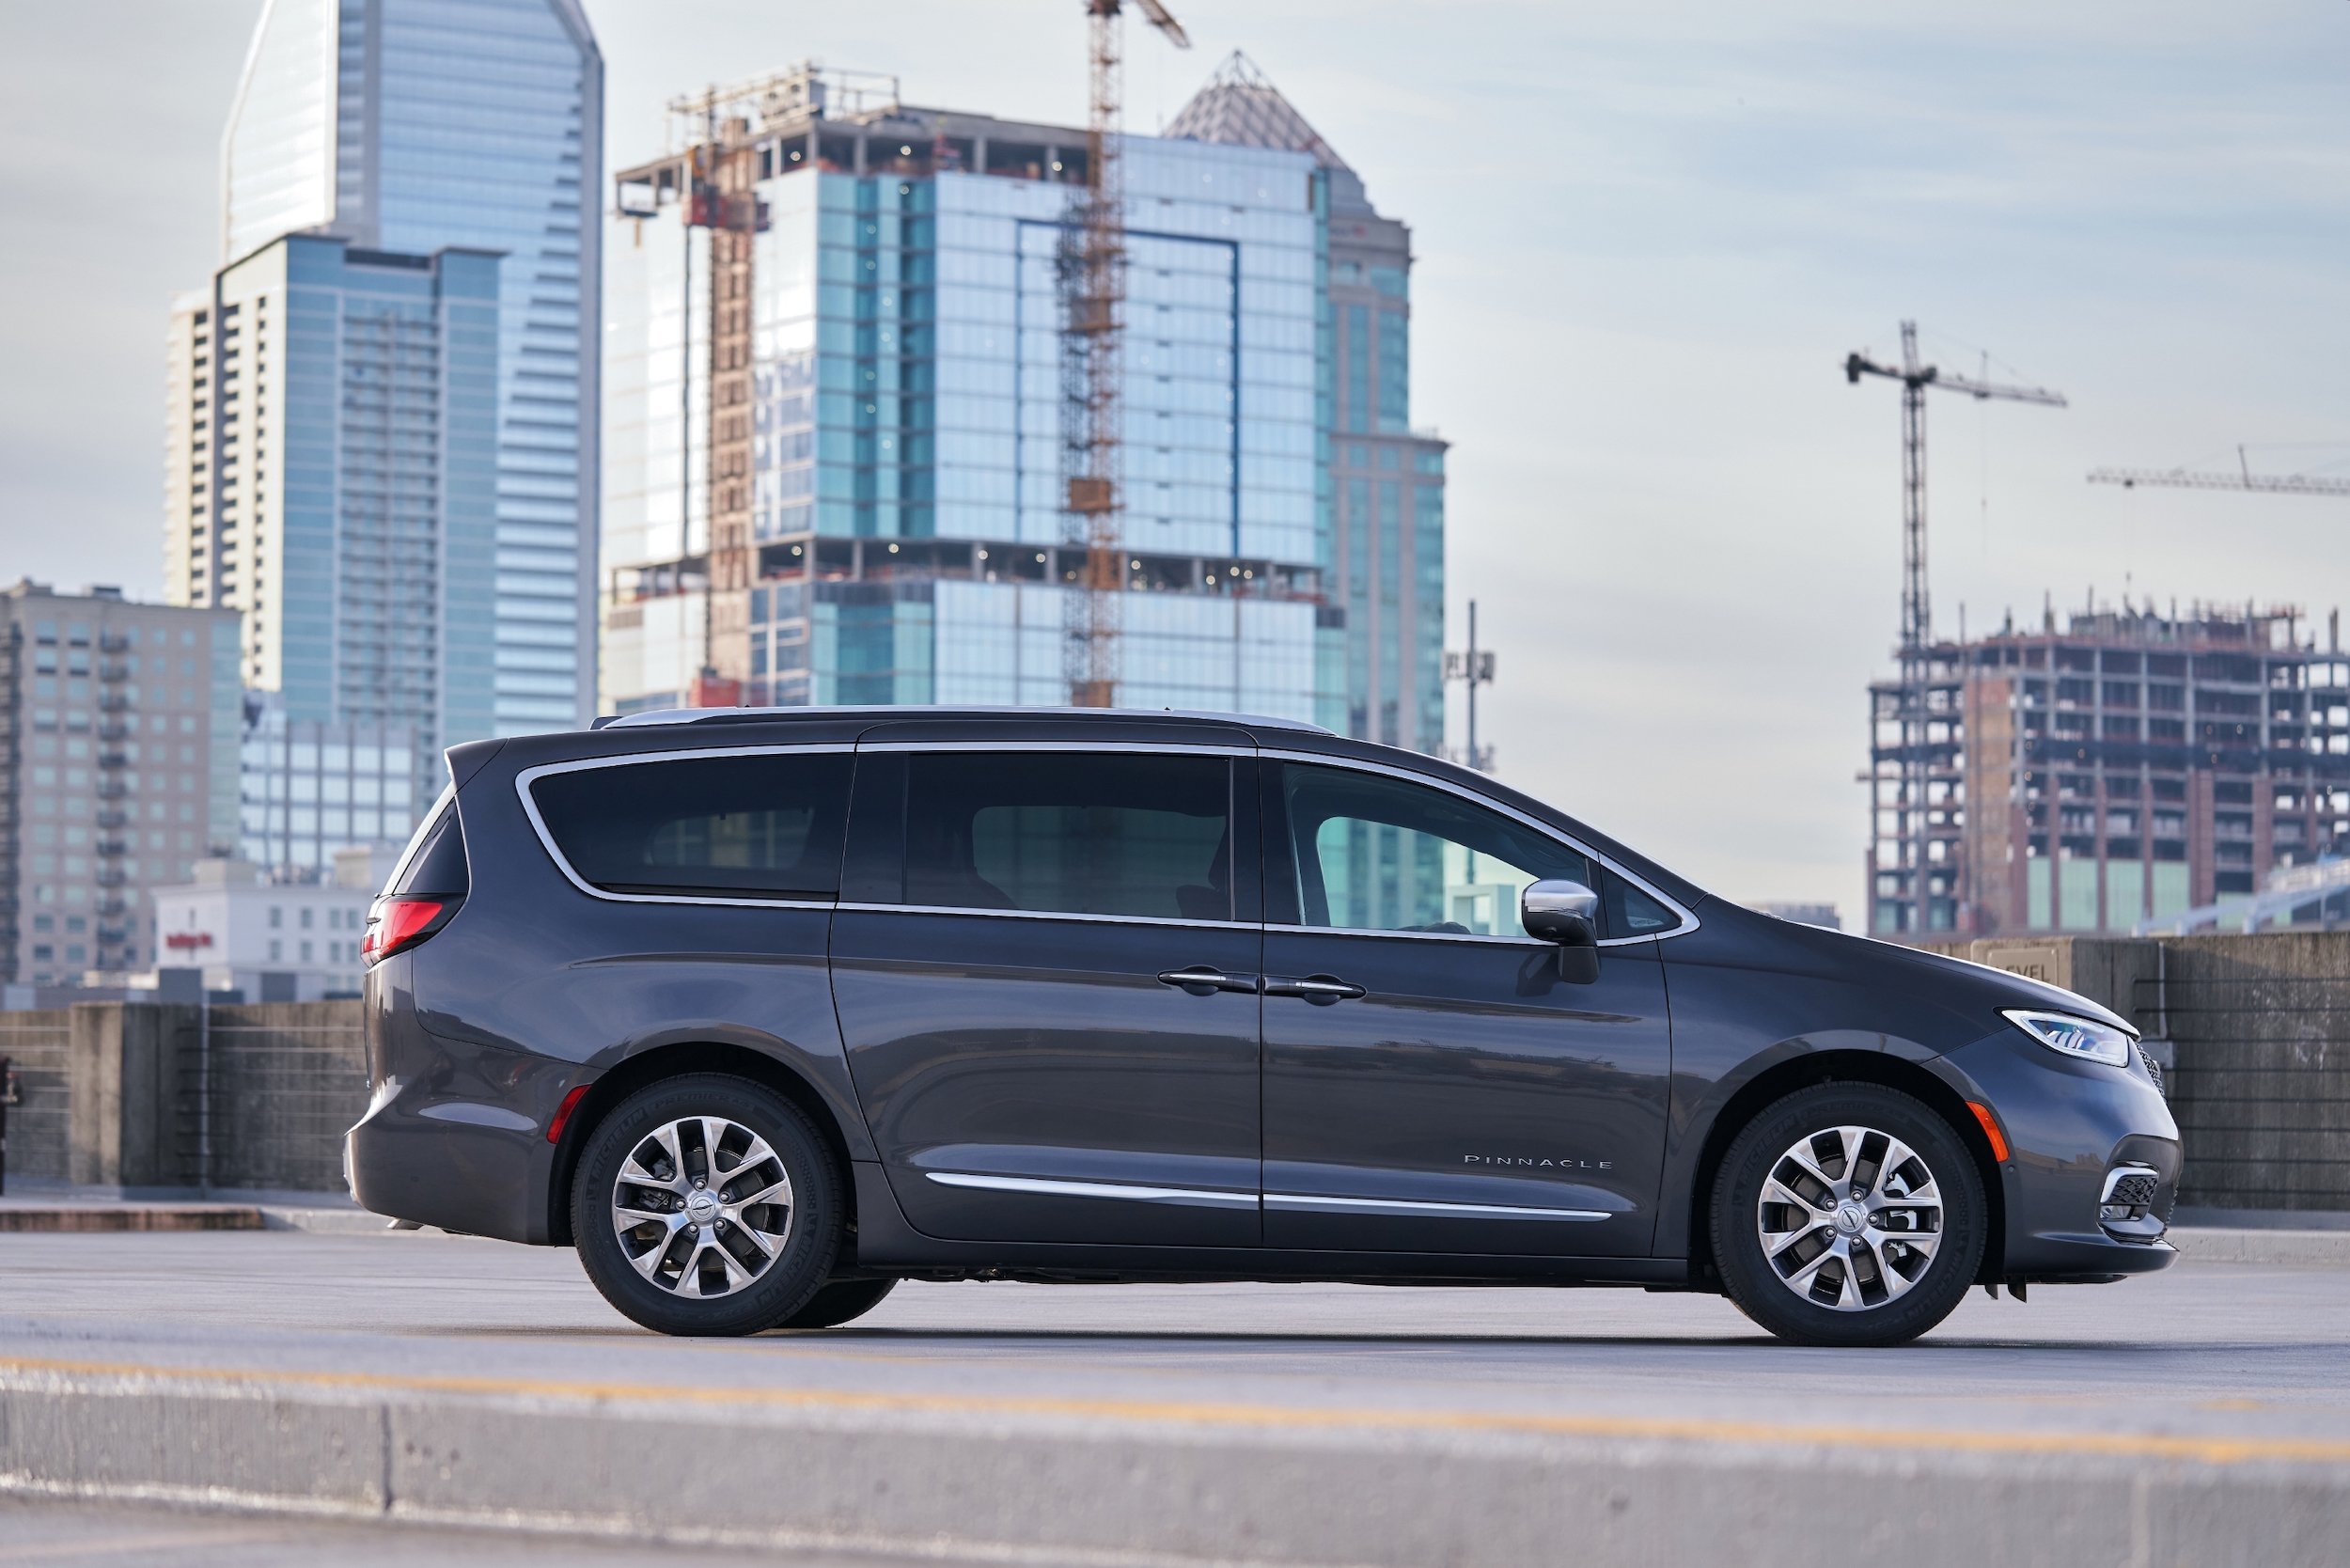 The 2021 Chrysler Pacifica Pinnacle Hybrid features new Platinum Chrome 18-inch wheels.